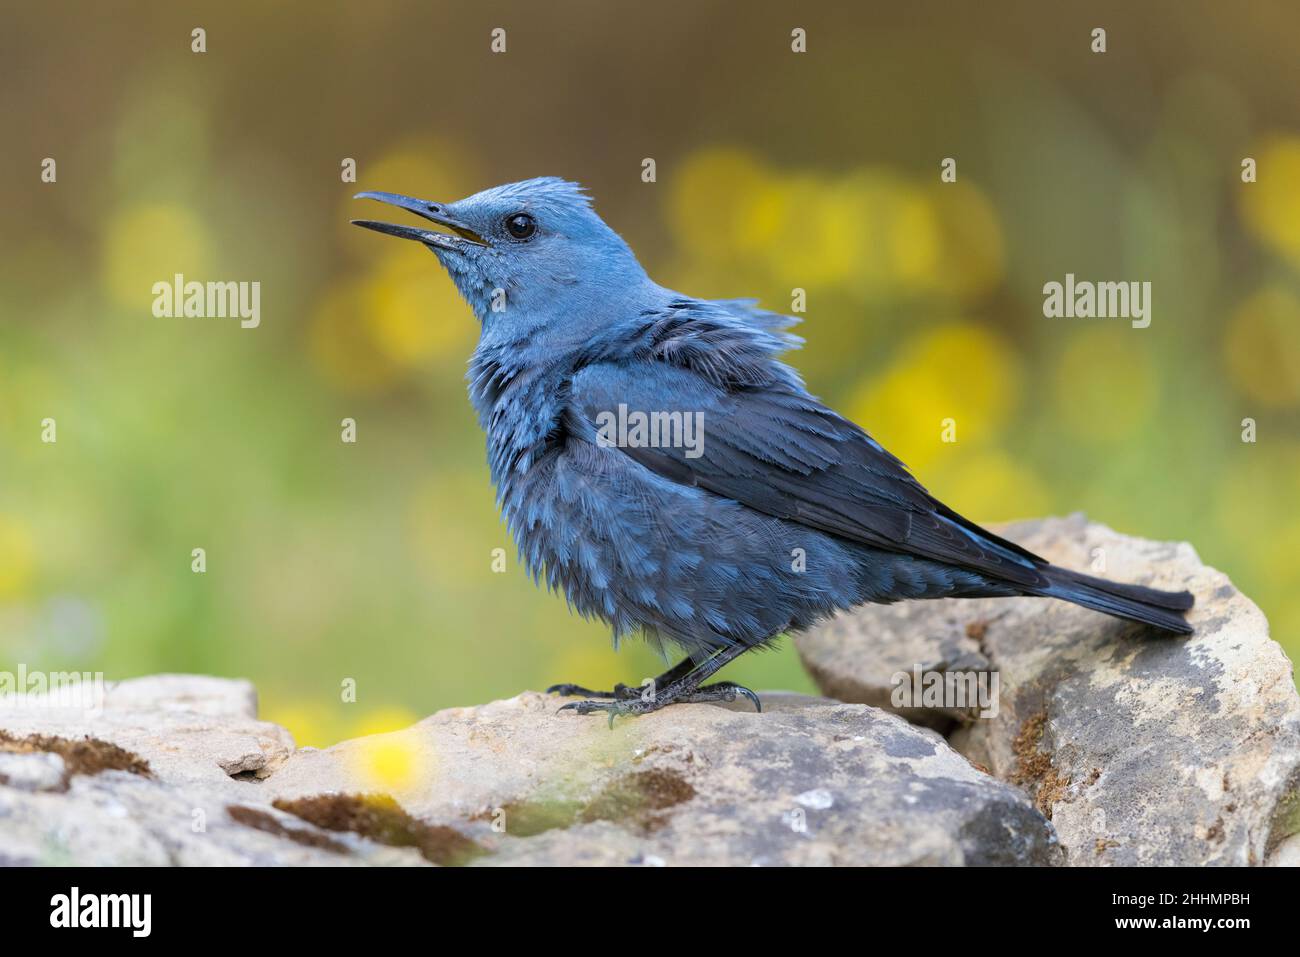 Blue Rock Thrush (Monticola solitarius), side view of an adult male singing from a rock, Campania, Italy Stock Photo